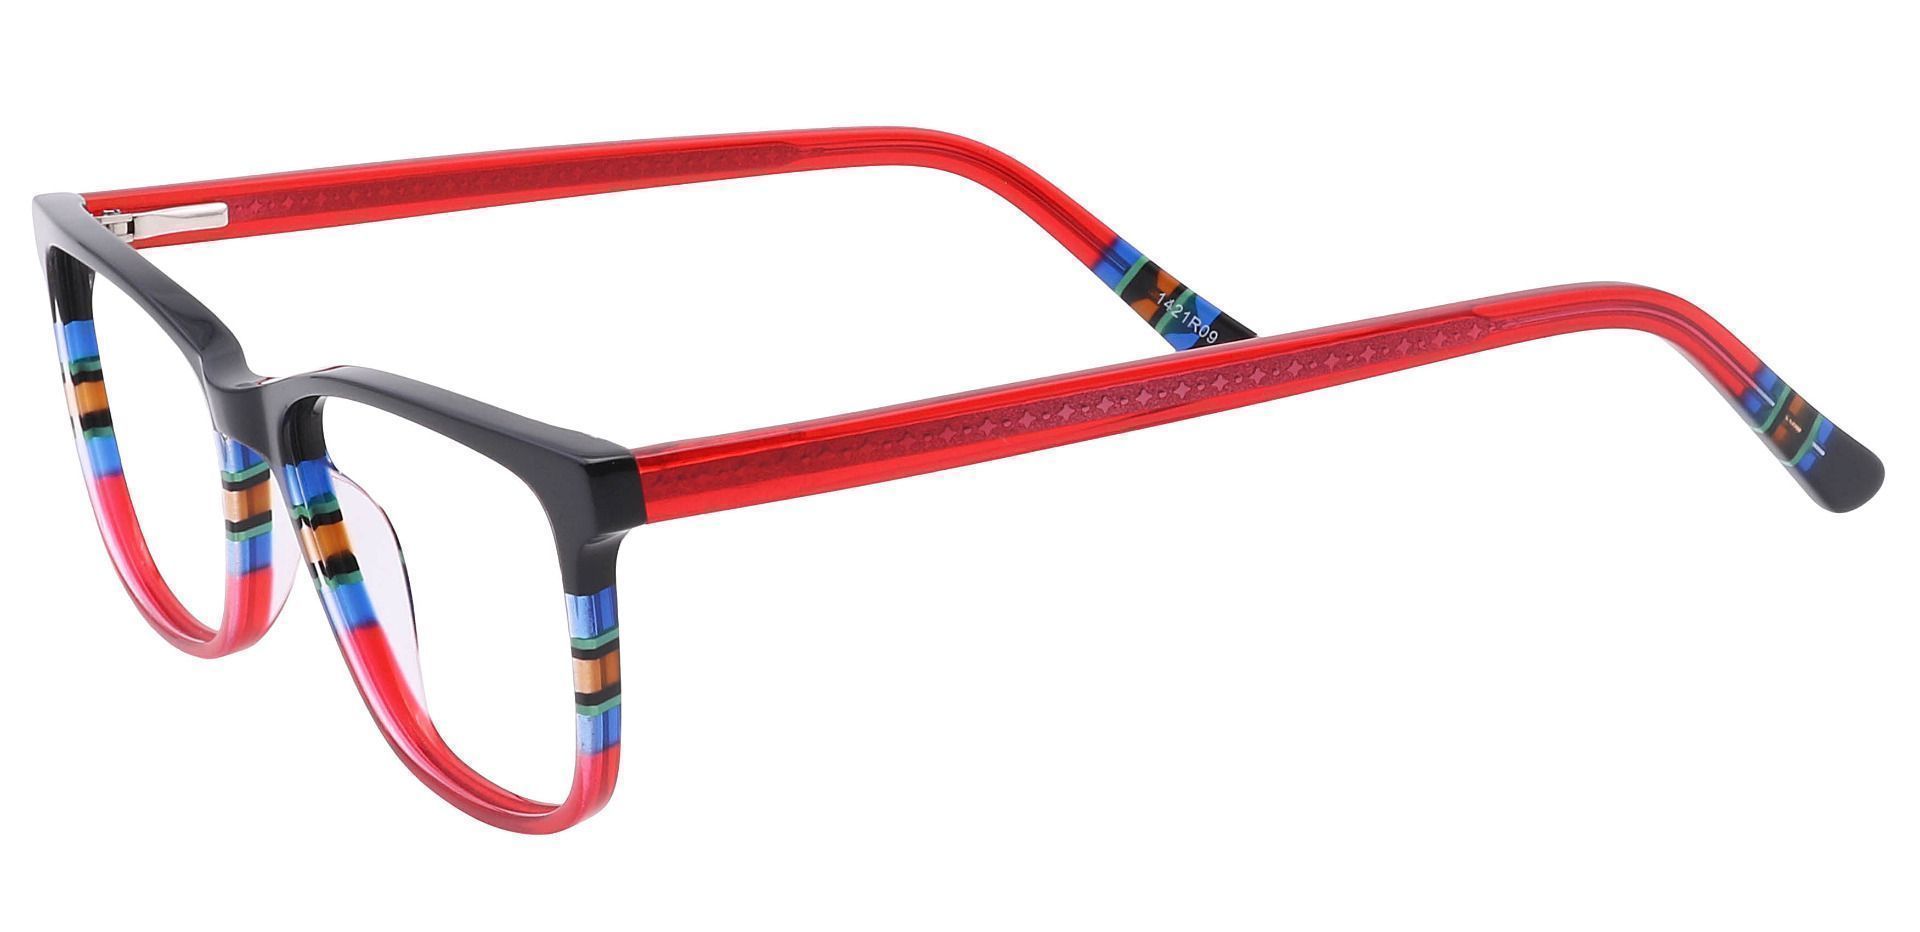 Taffie Oval Lined Bifocal Glasses - Red